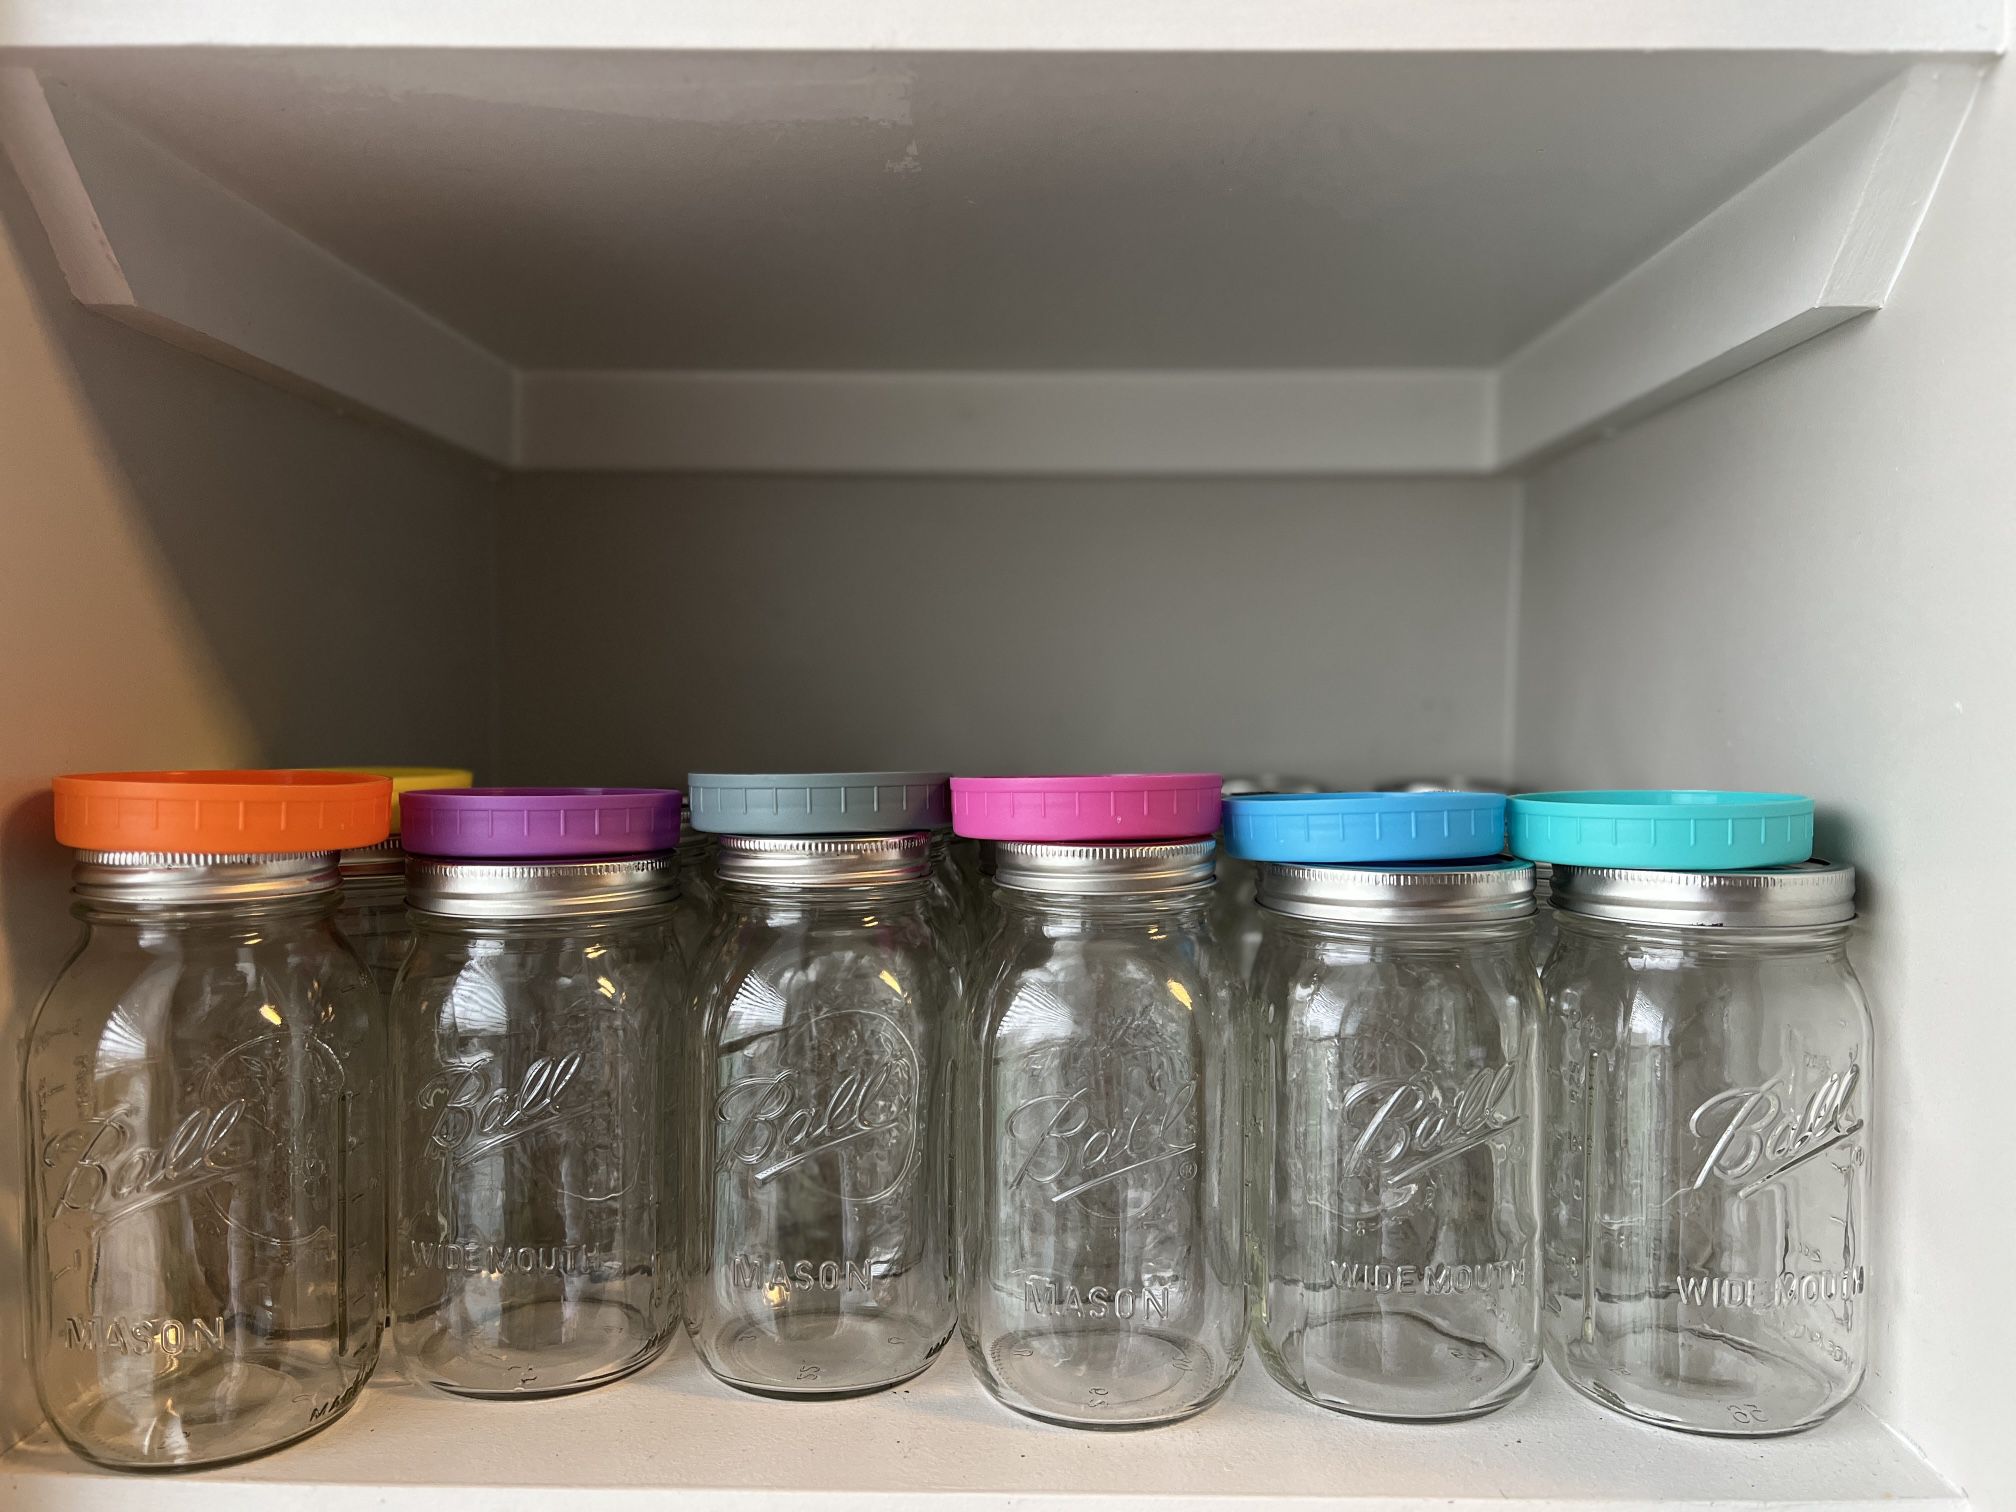 22 Almost New Ball Mason Jars - Offer Your Best Price!